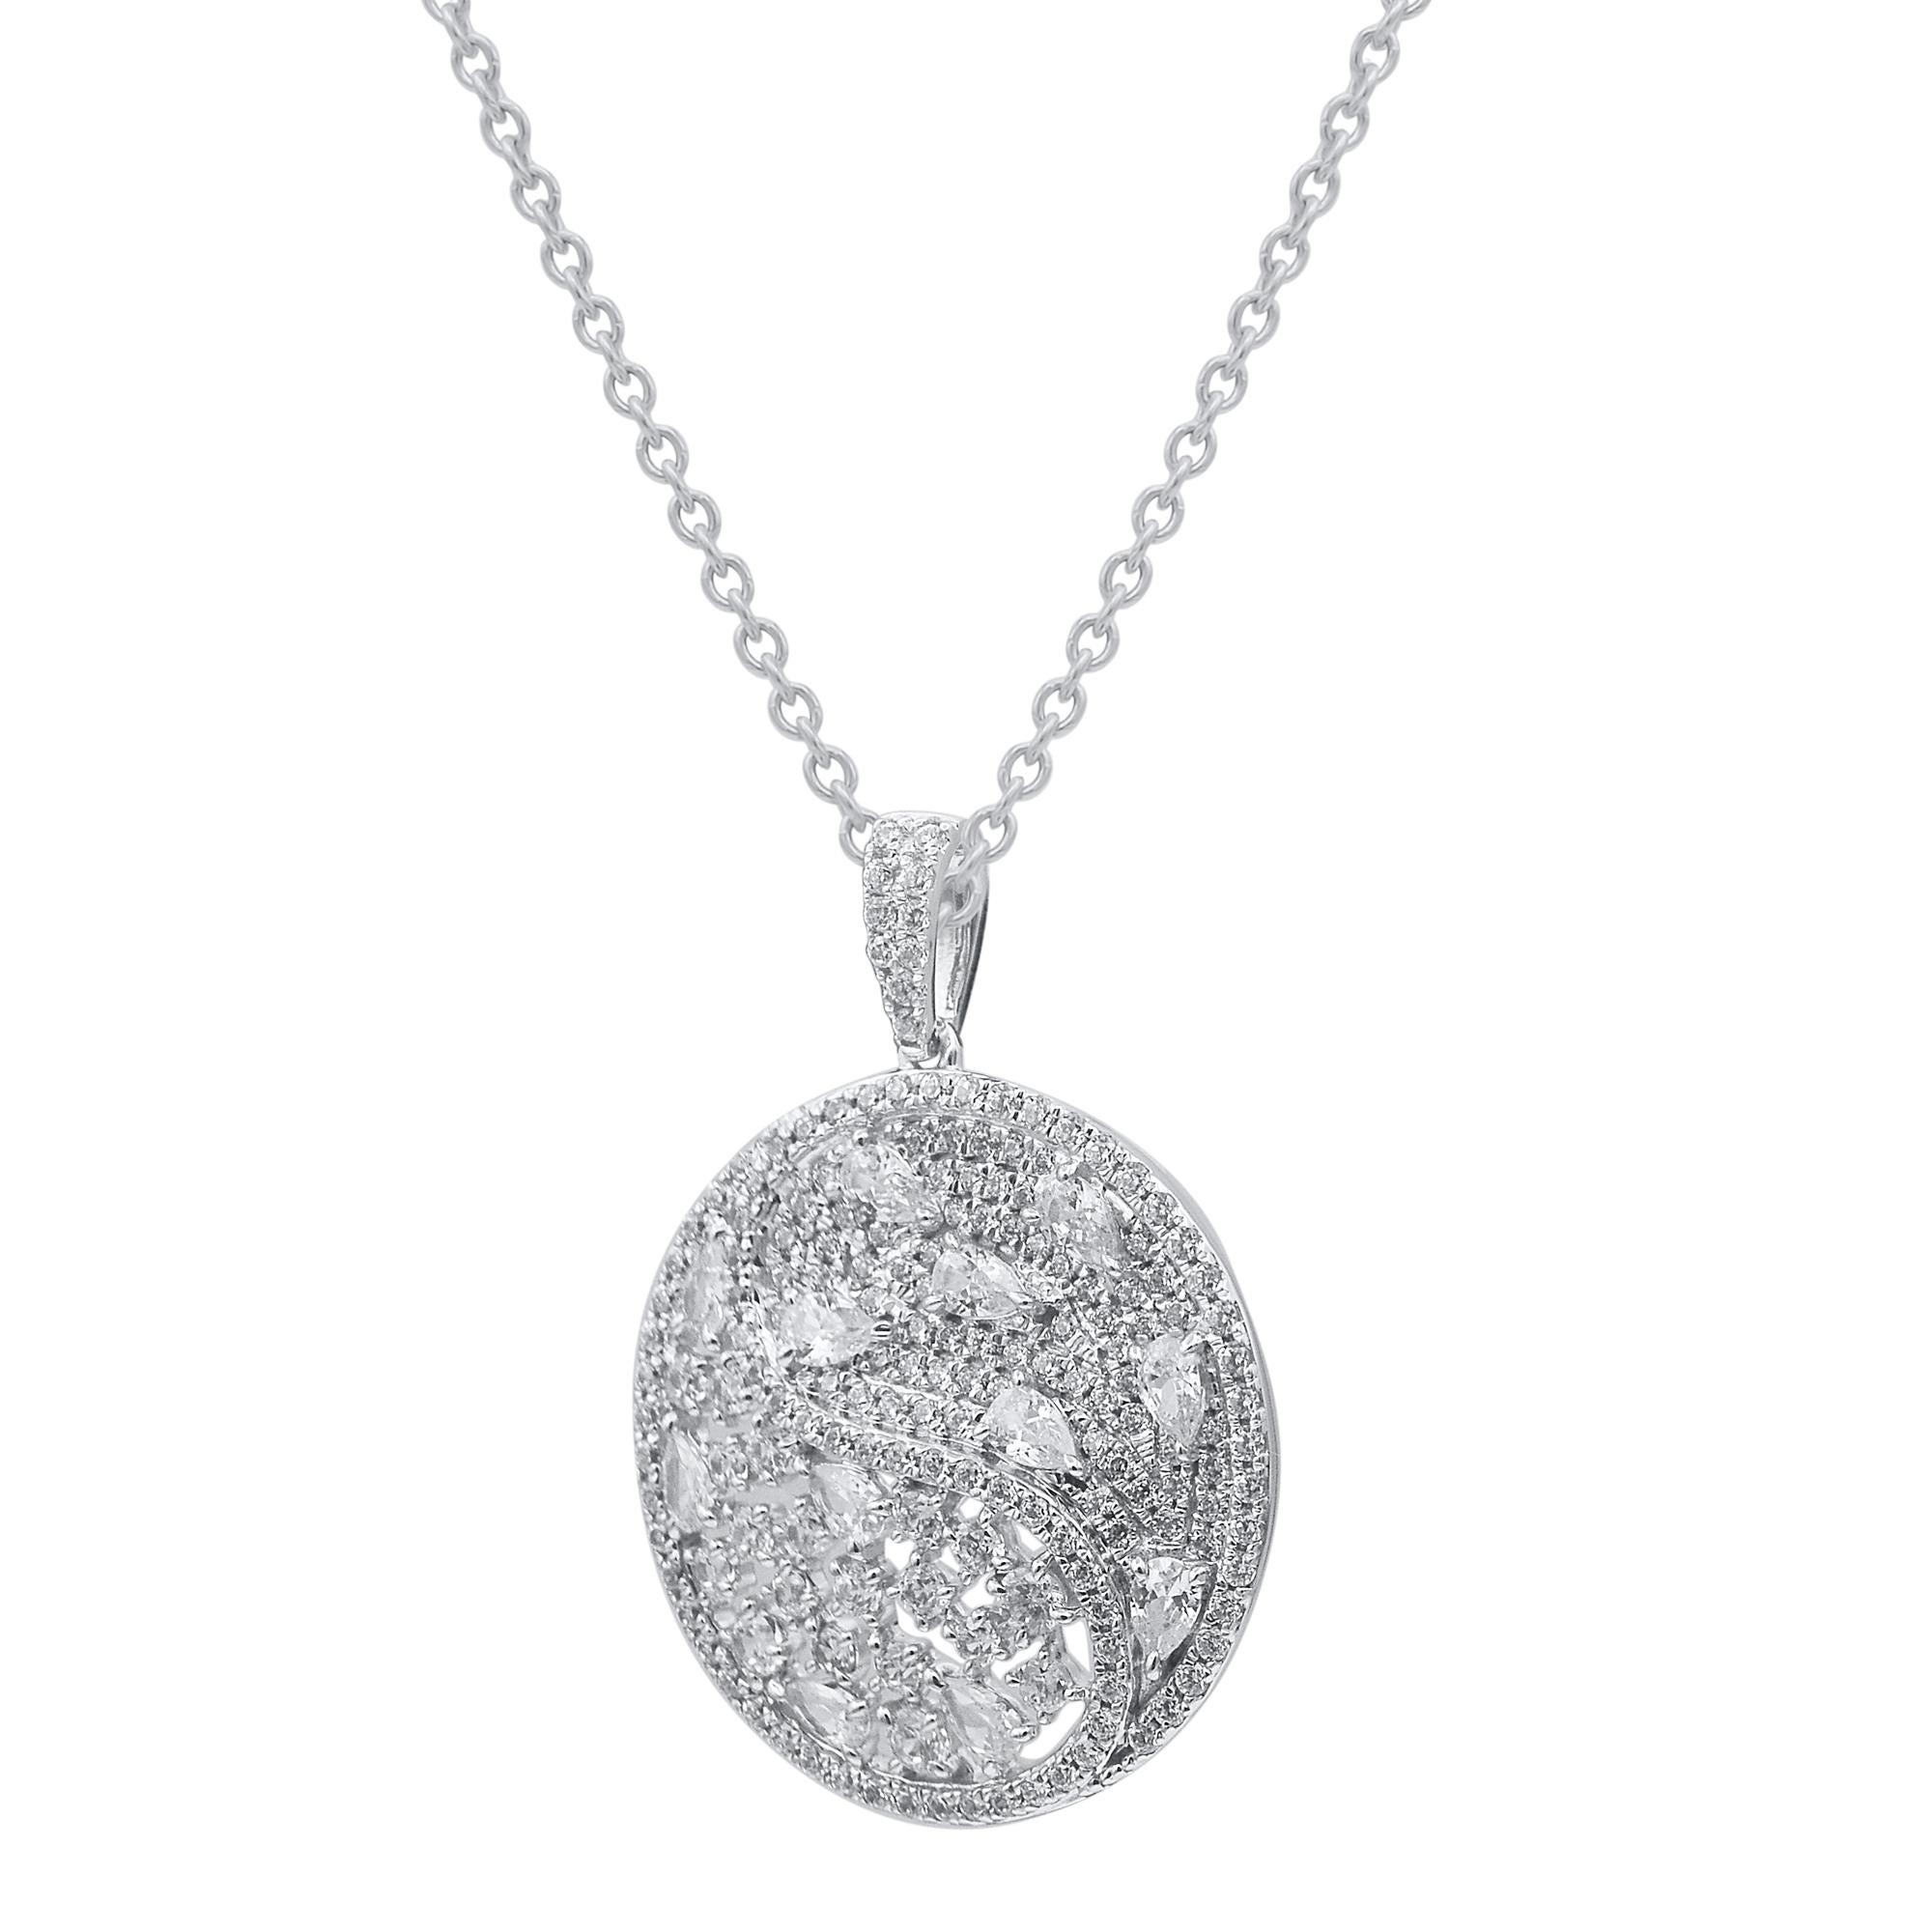 This diamond circle pendant fits any occasion with ease. These diamond pendants are studded with 184 single cut, brilliant cut & pear natural diamonds in prongs setting and crafted in 18 karat white gold. Diamonds are graded as H-I color and I-2